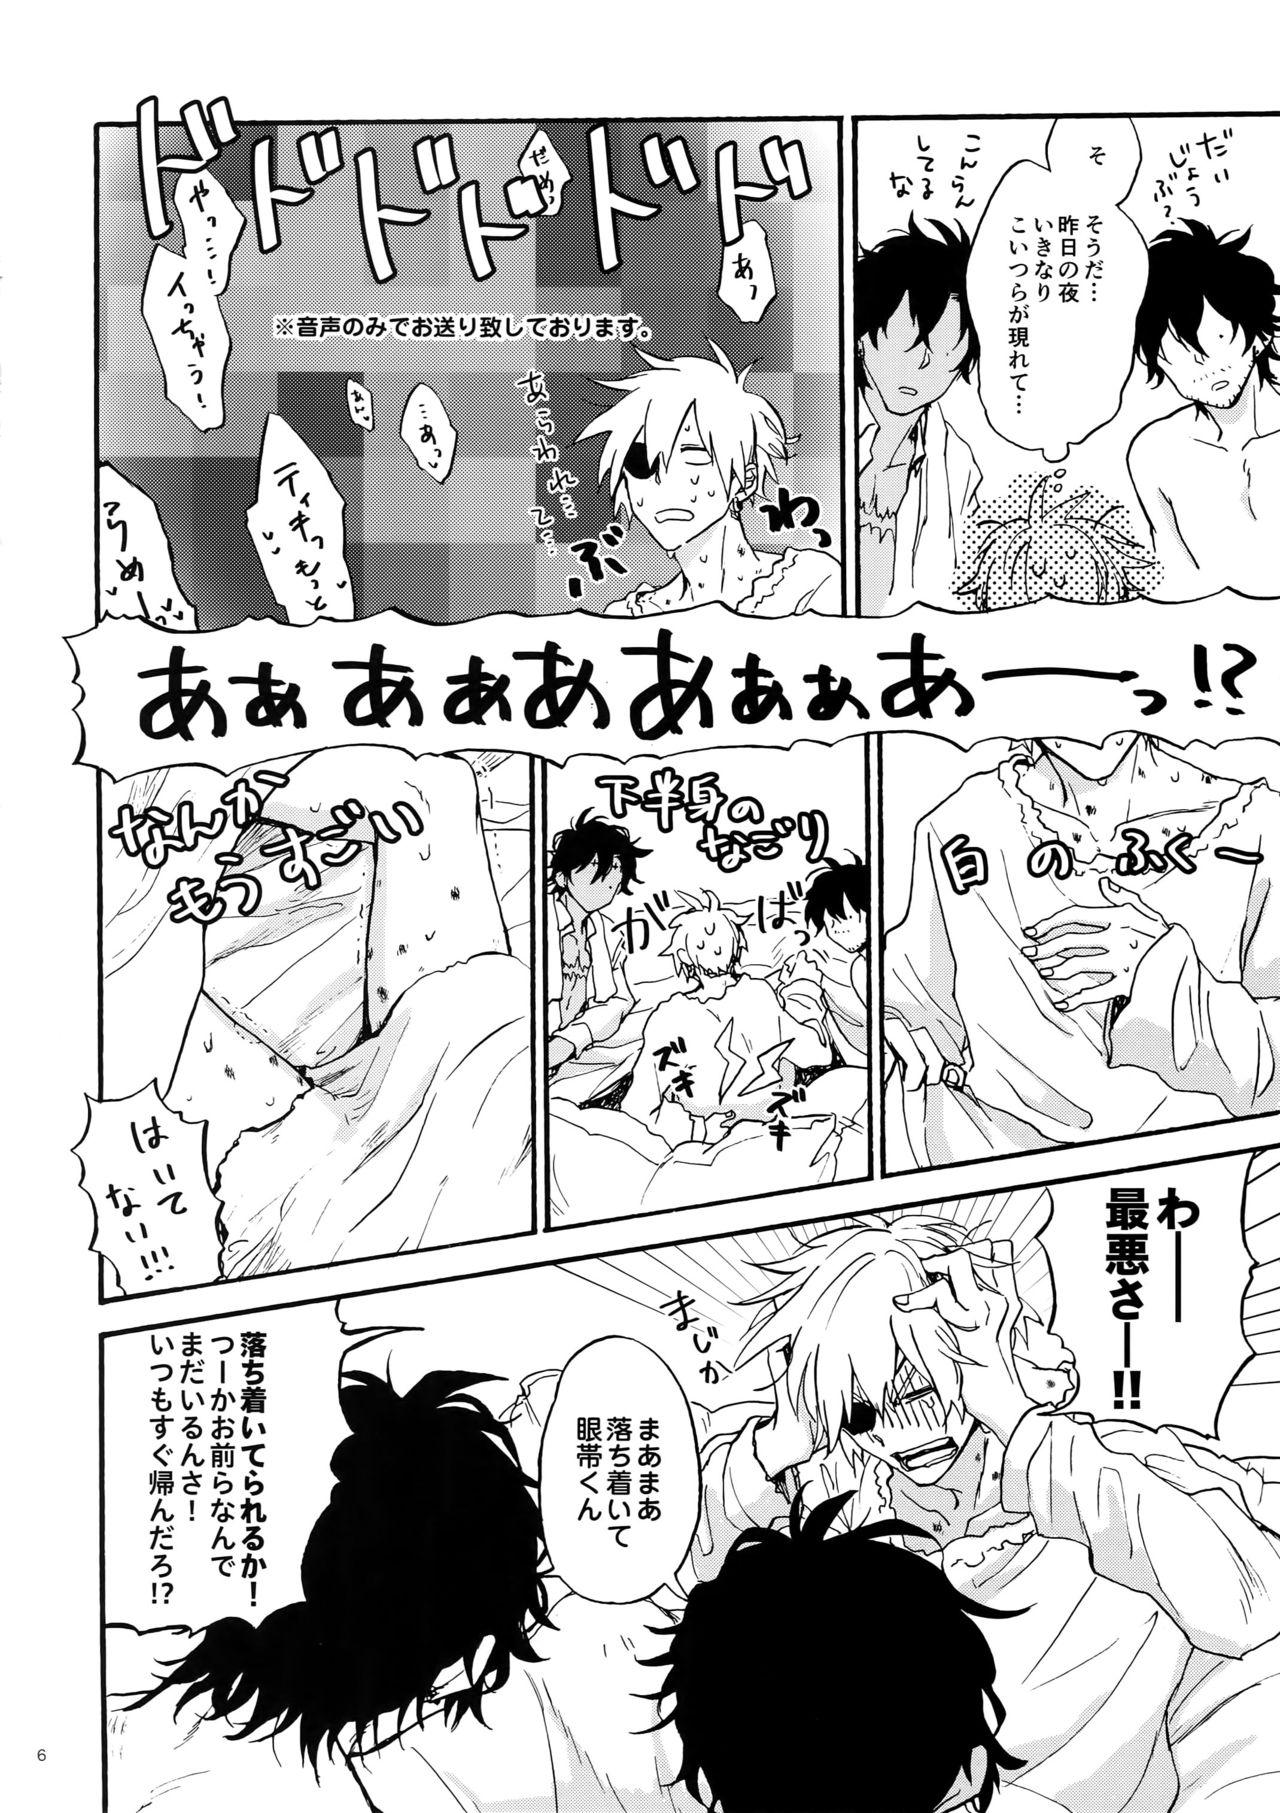 Domination Shiro to Kuro to ore - D.gray man Shavedpussy - Page 5